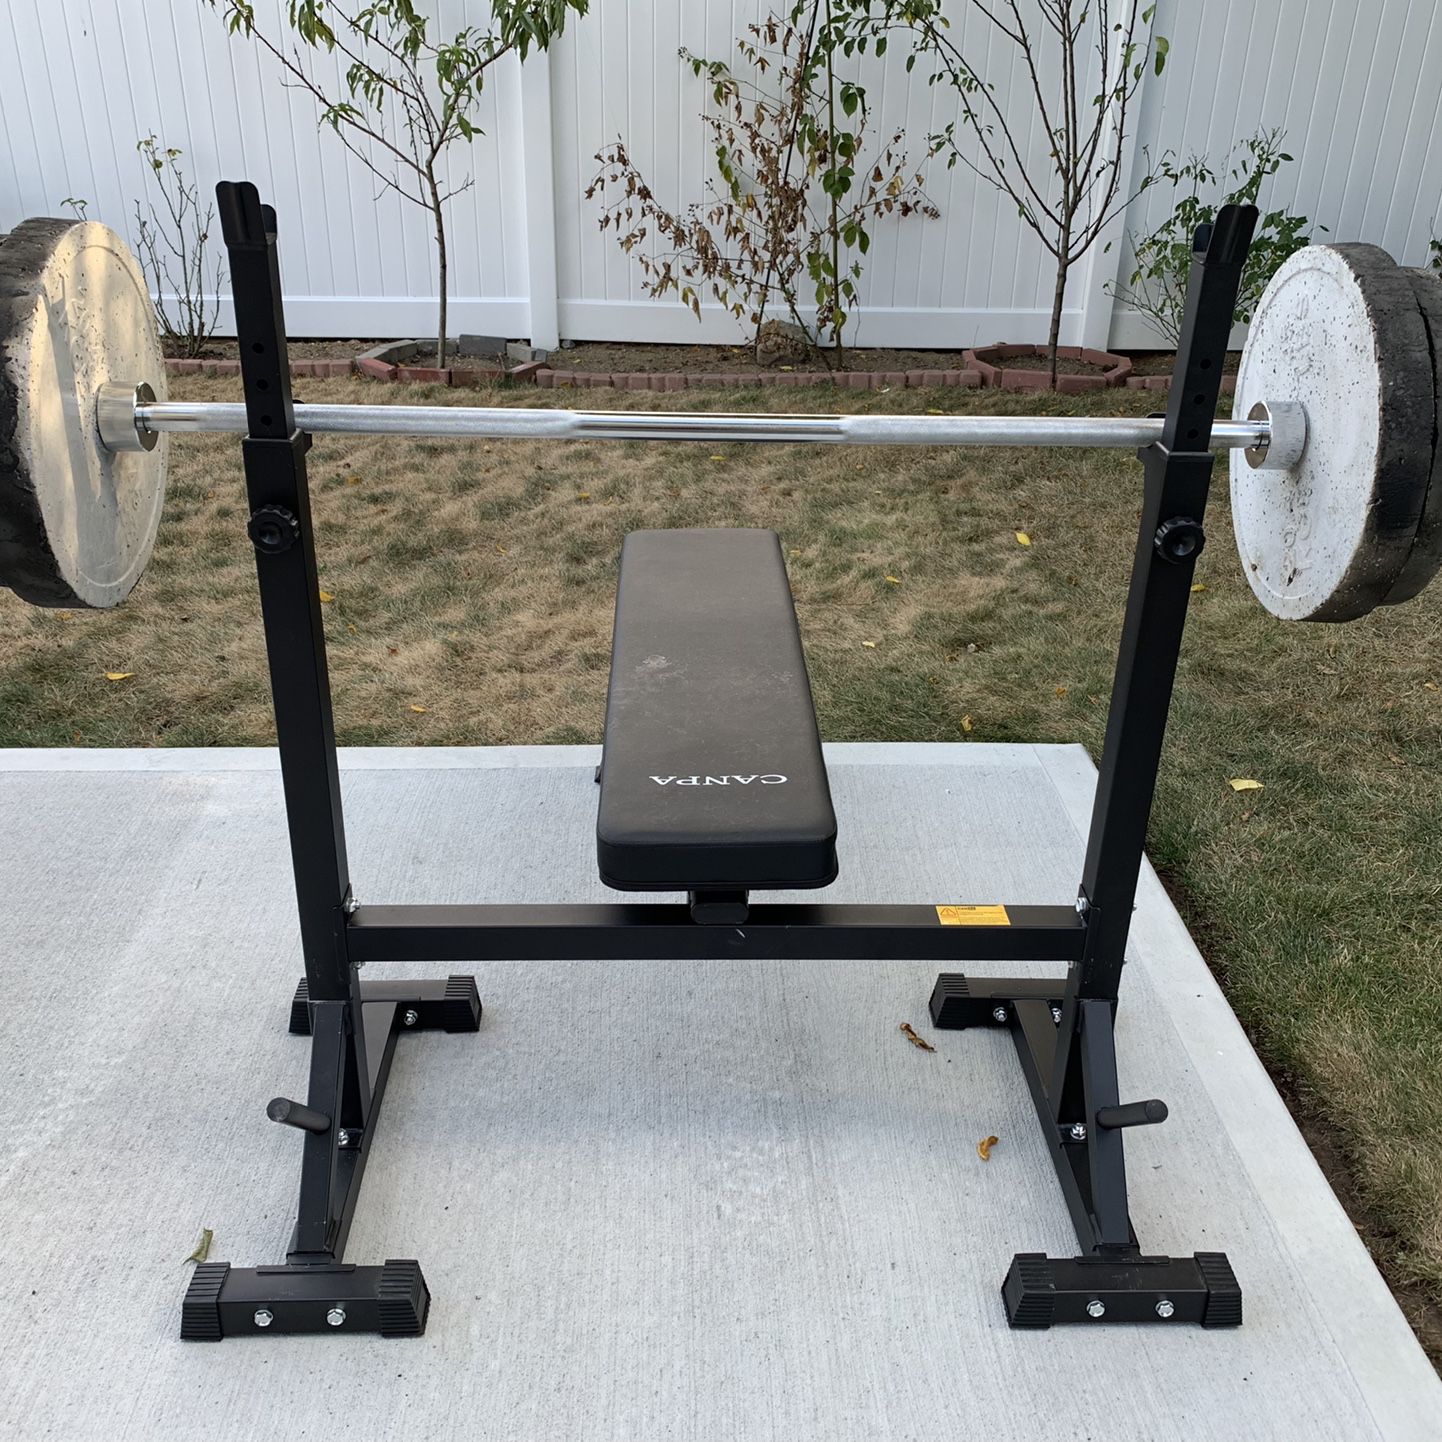 Bench Press, CANPA Olympic Weight Bench with Squat Rack Workout Bench  Adjustable Barbell Rack Stand Strength Training Home Gym Multi-Function